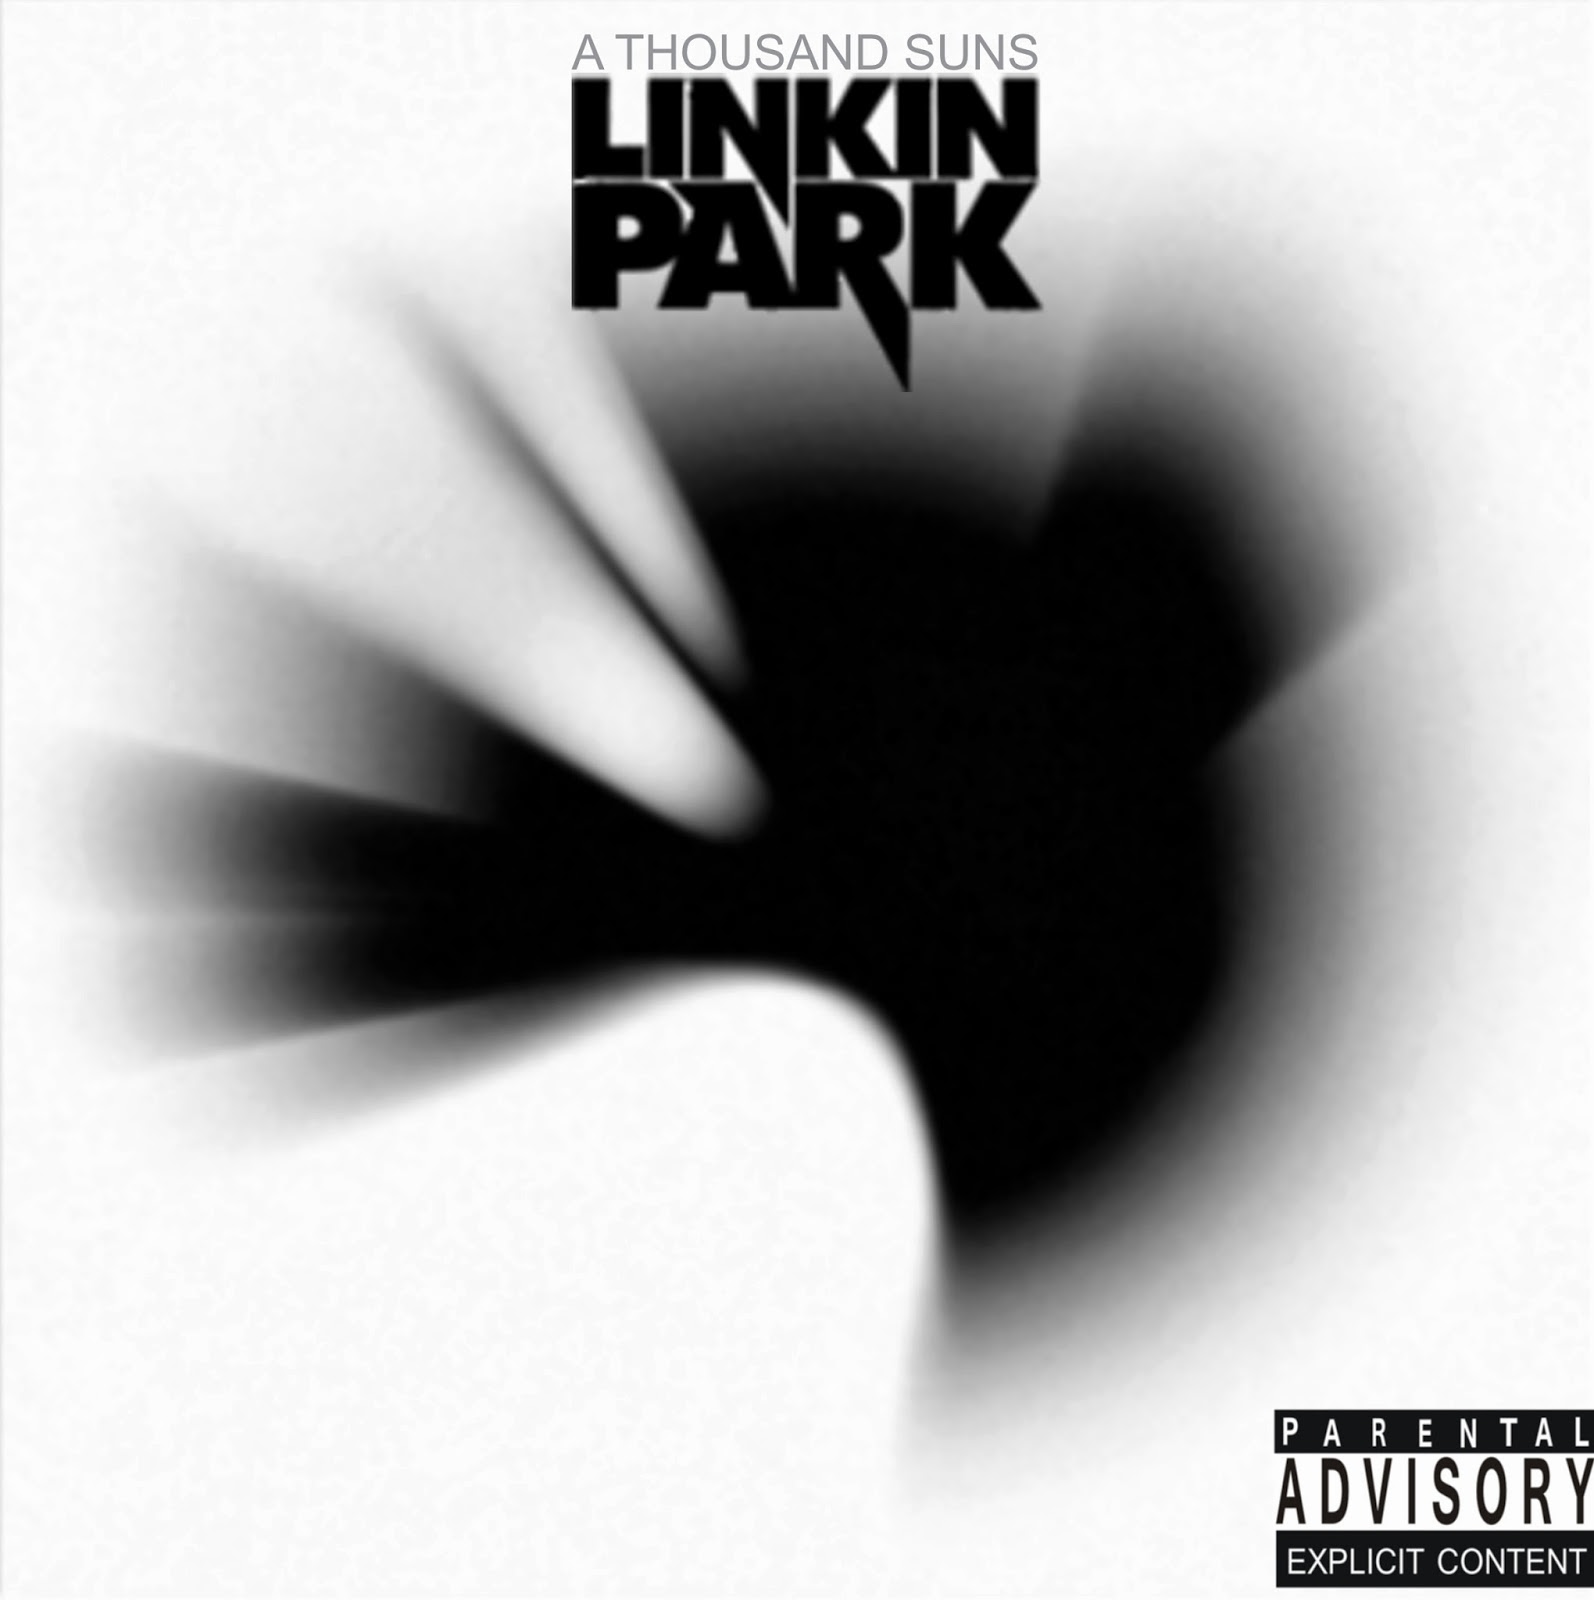 linkin park full discography download